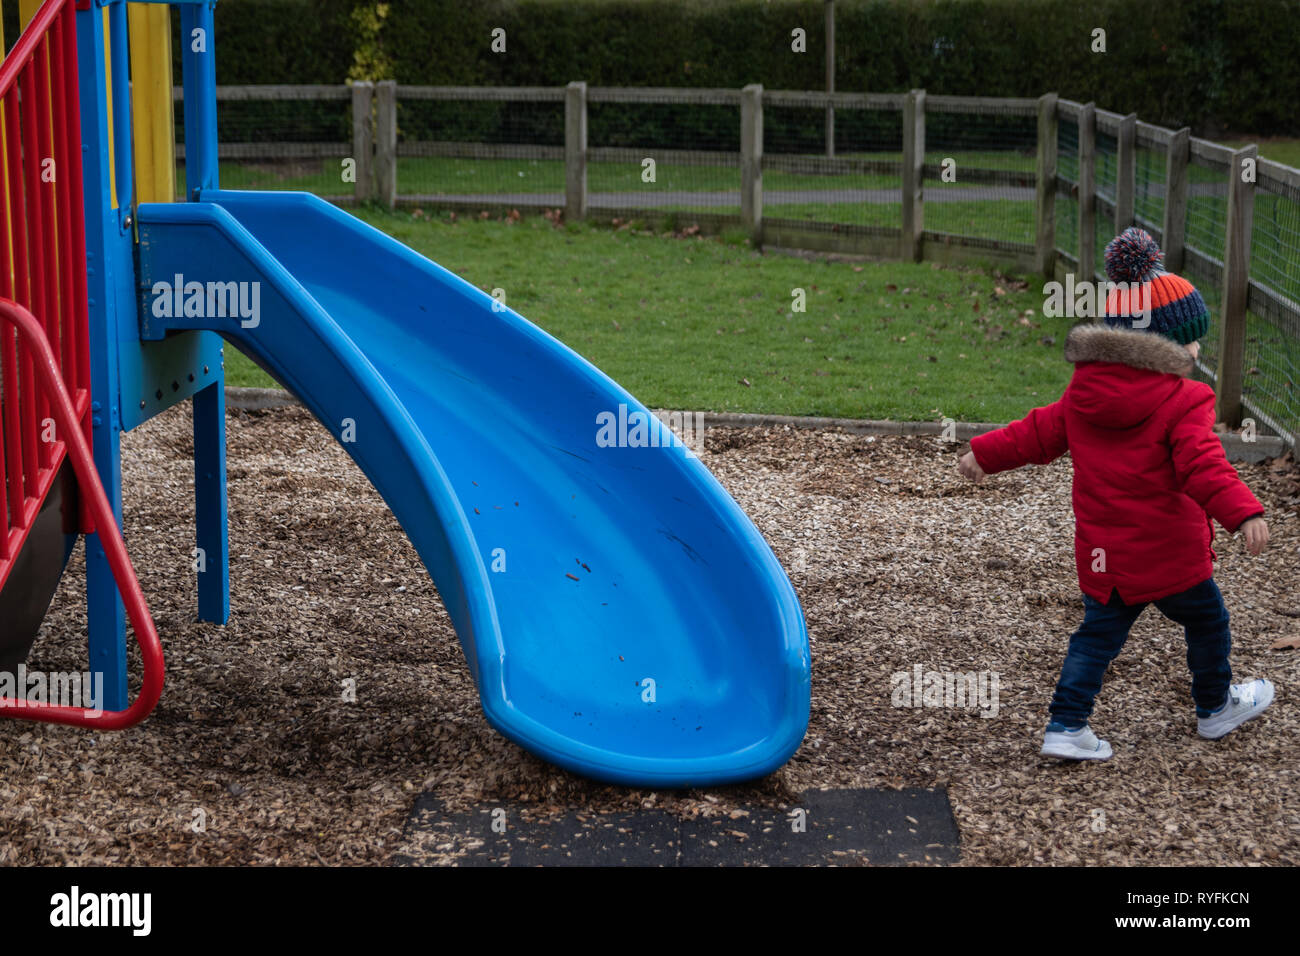 Two year old boy playing on the plastic slide at the park wearing a red coat and bobble hat Stock Photo